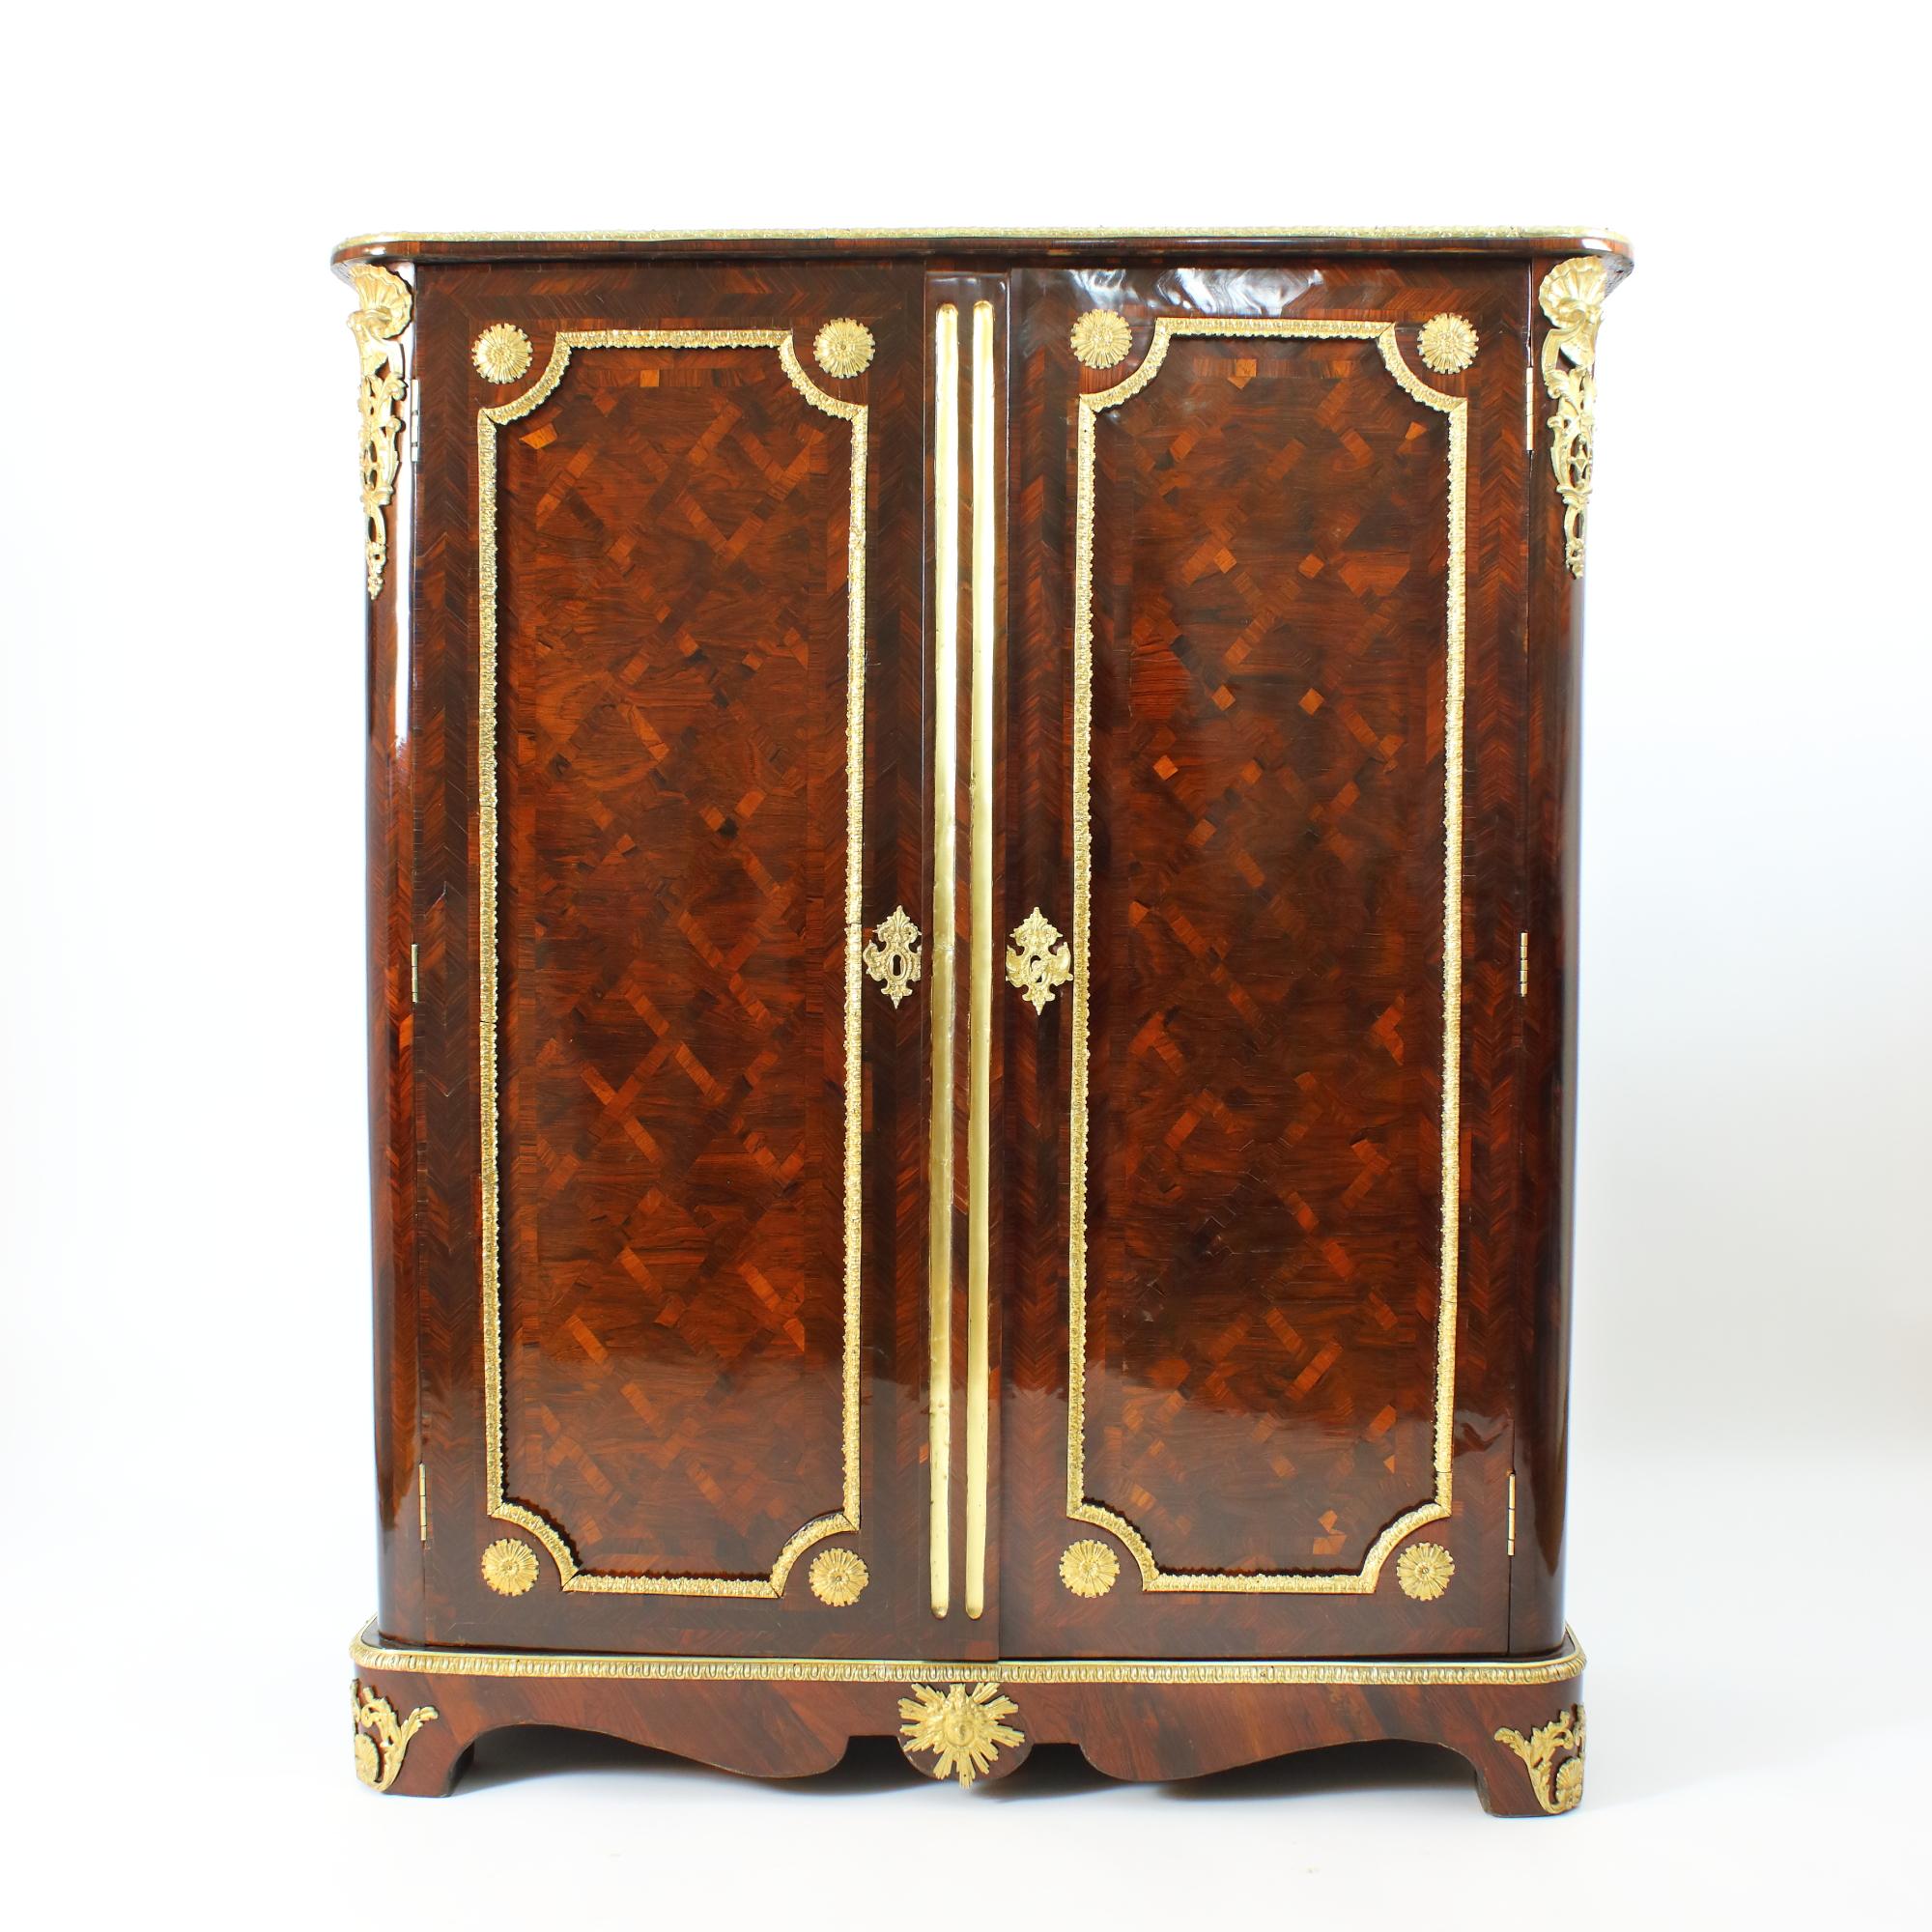 Early 18th Century French Louis XIV / Régence Marquetry Armoire or Wardrobe

The rectangular Louis XIV Régence armoire or wardrobe with rounded corners standing on a short base with bracket feet and curved apron with gilt-bronze Apollo head mount;